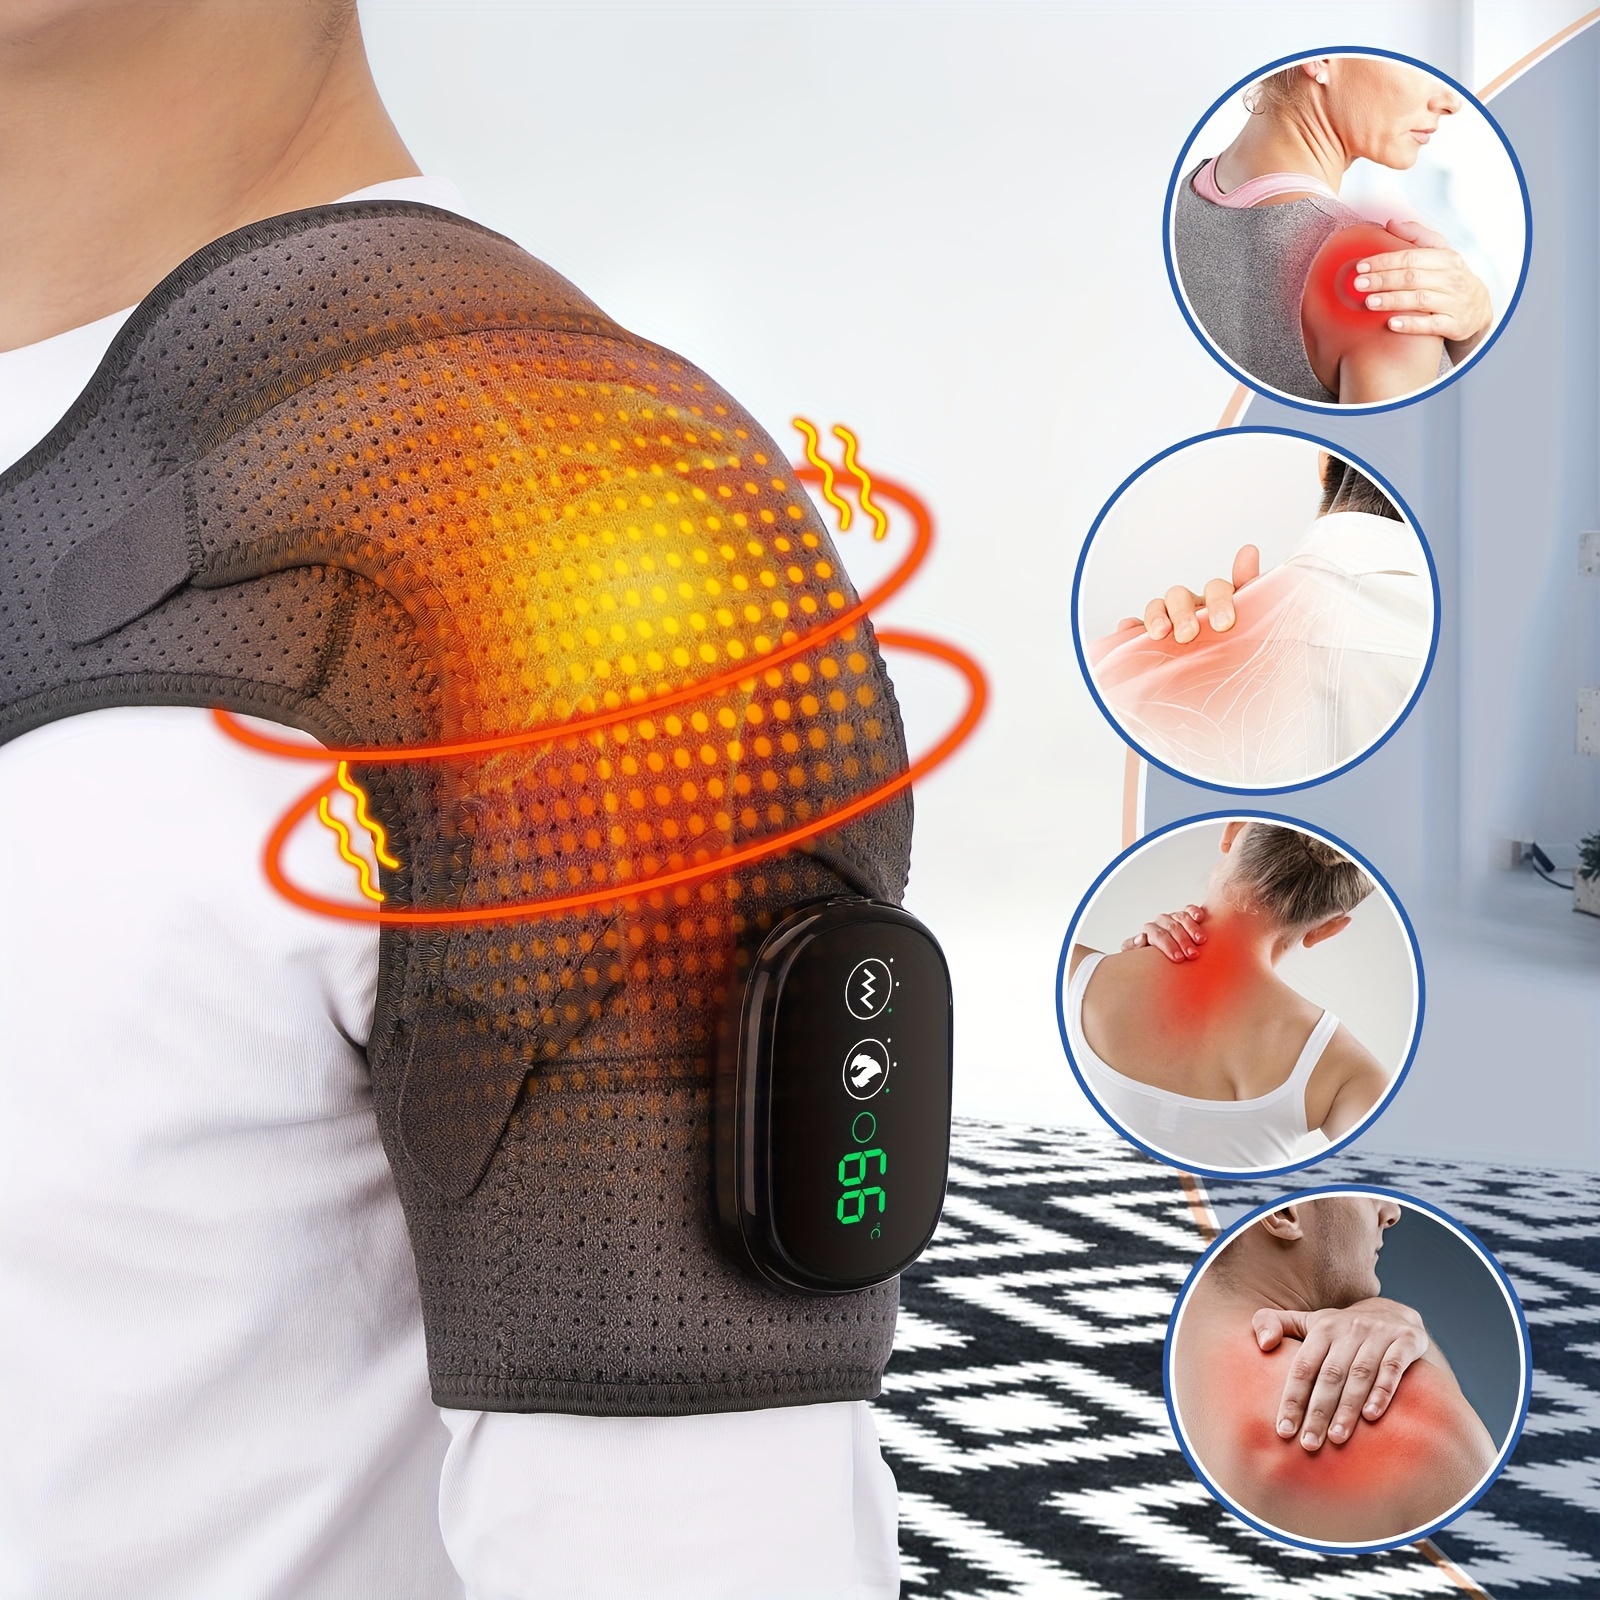 Cordless Heated Shoulder Brace, Shoulder Massager Heating Pads for Rotator  Cuff Pain Upper Arm Muscle Relief 3 Heating and Vibrati